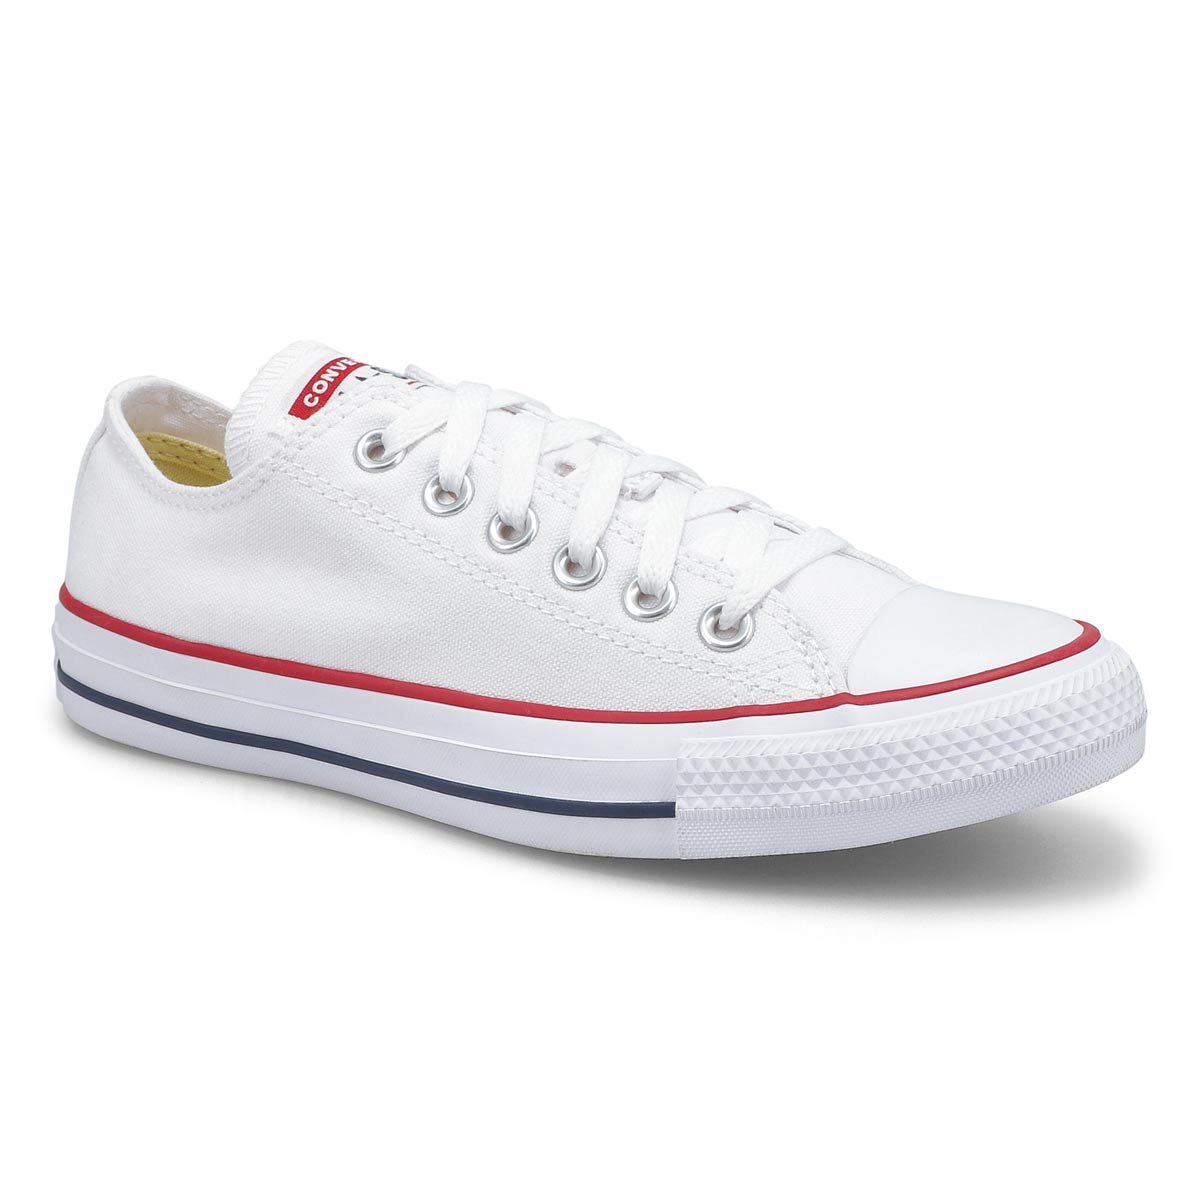 Shop - ladies all white converse - OFF 